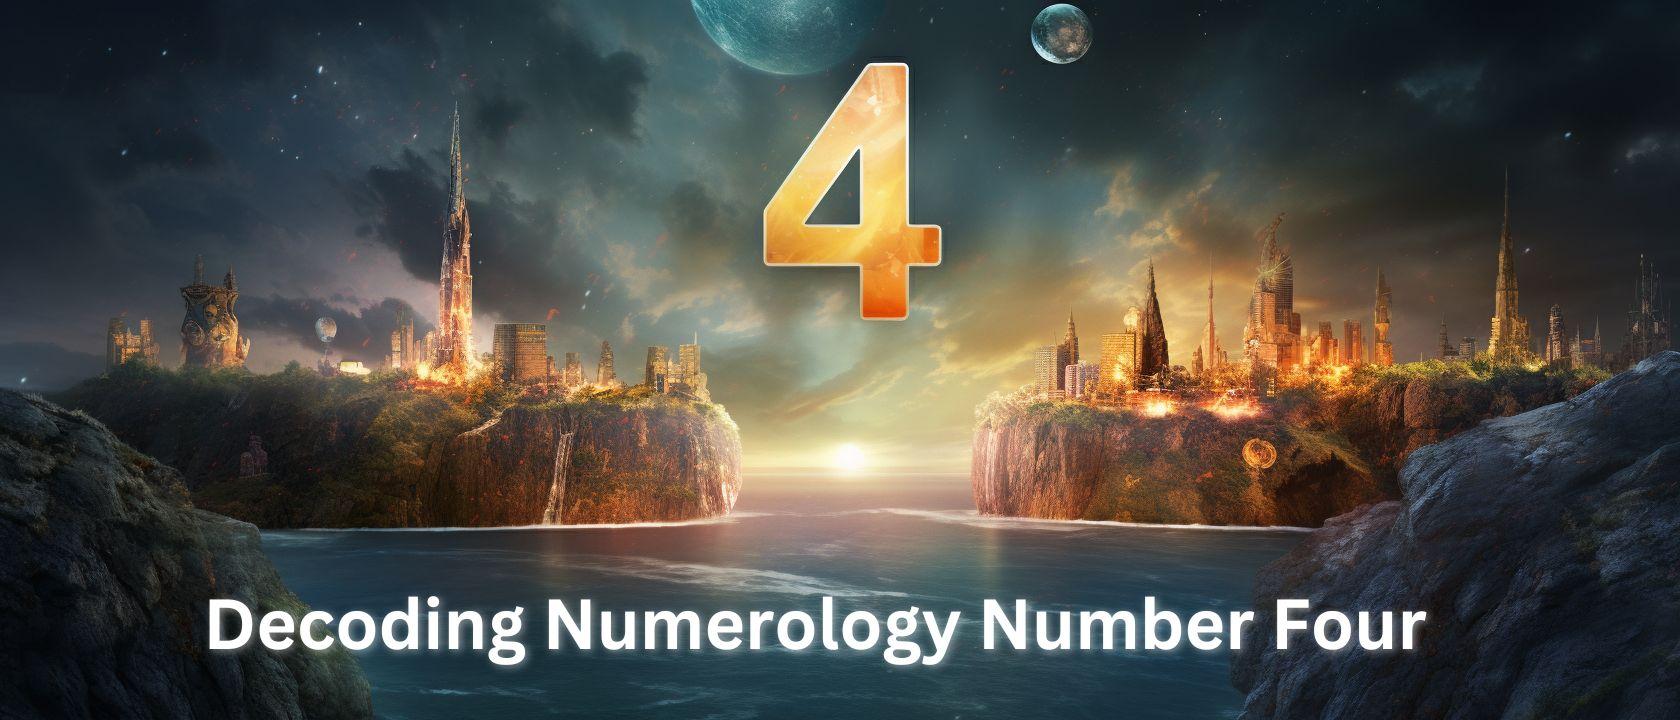 Decoding Numerology Number 4